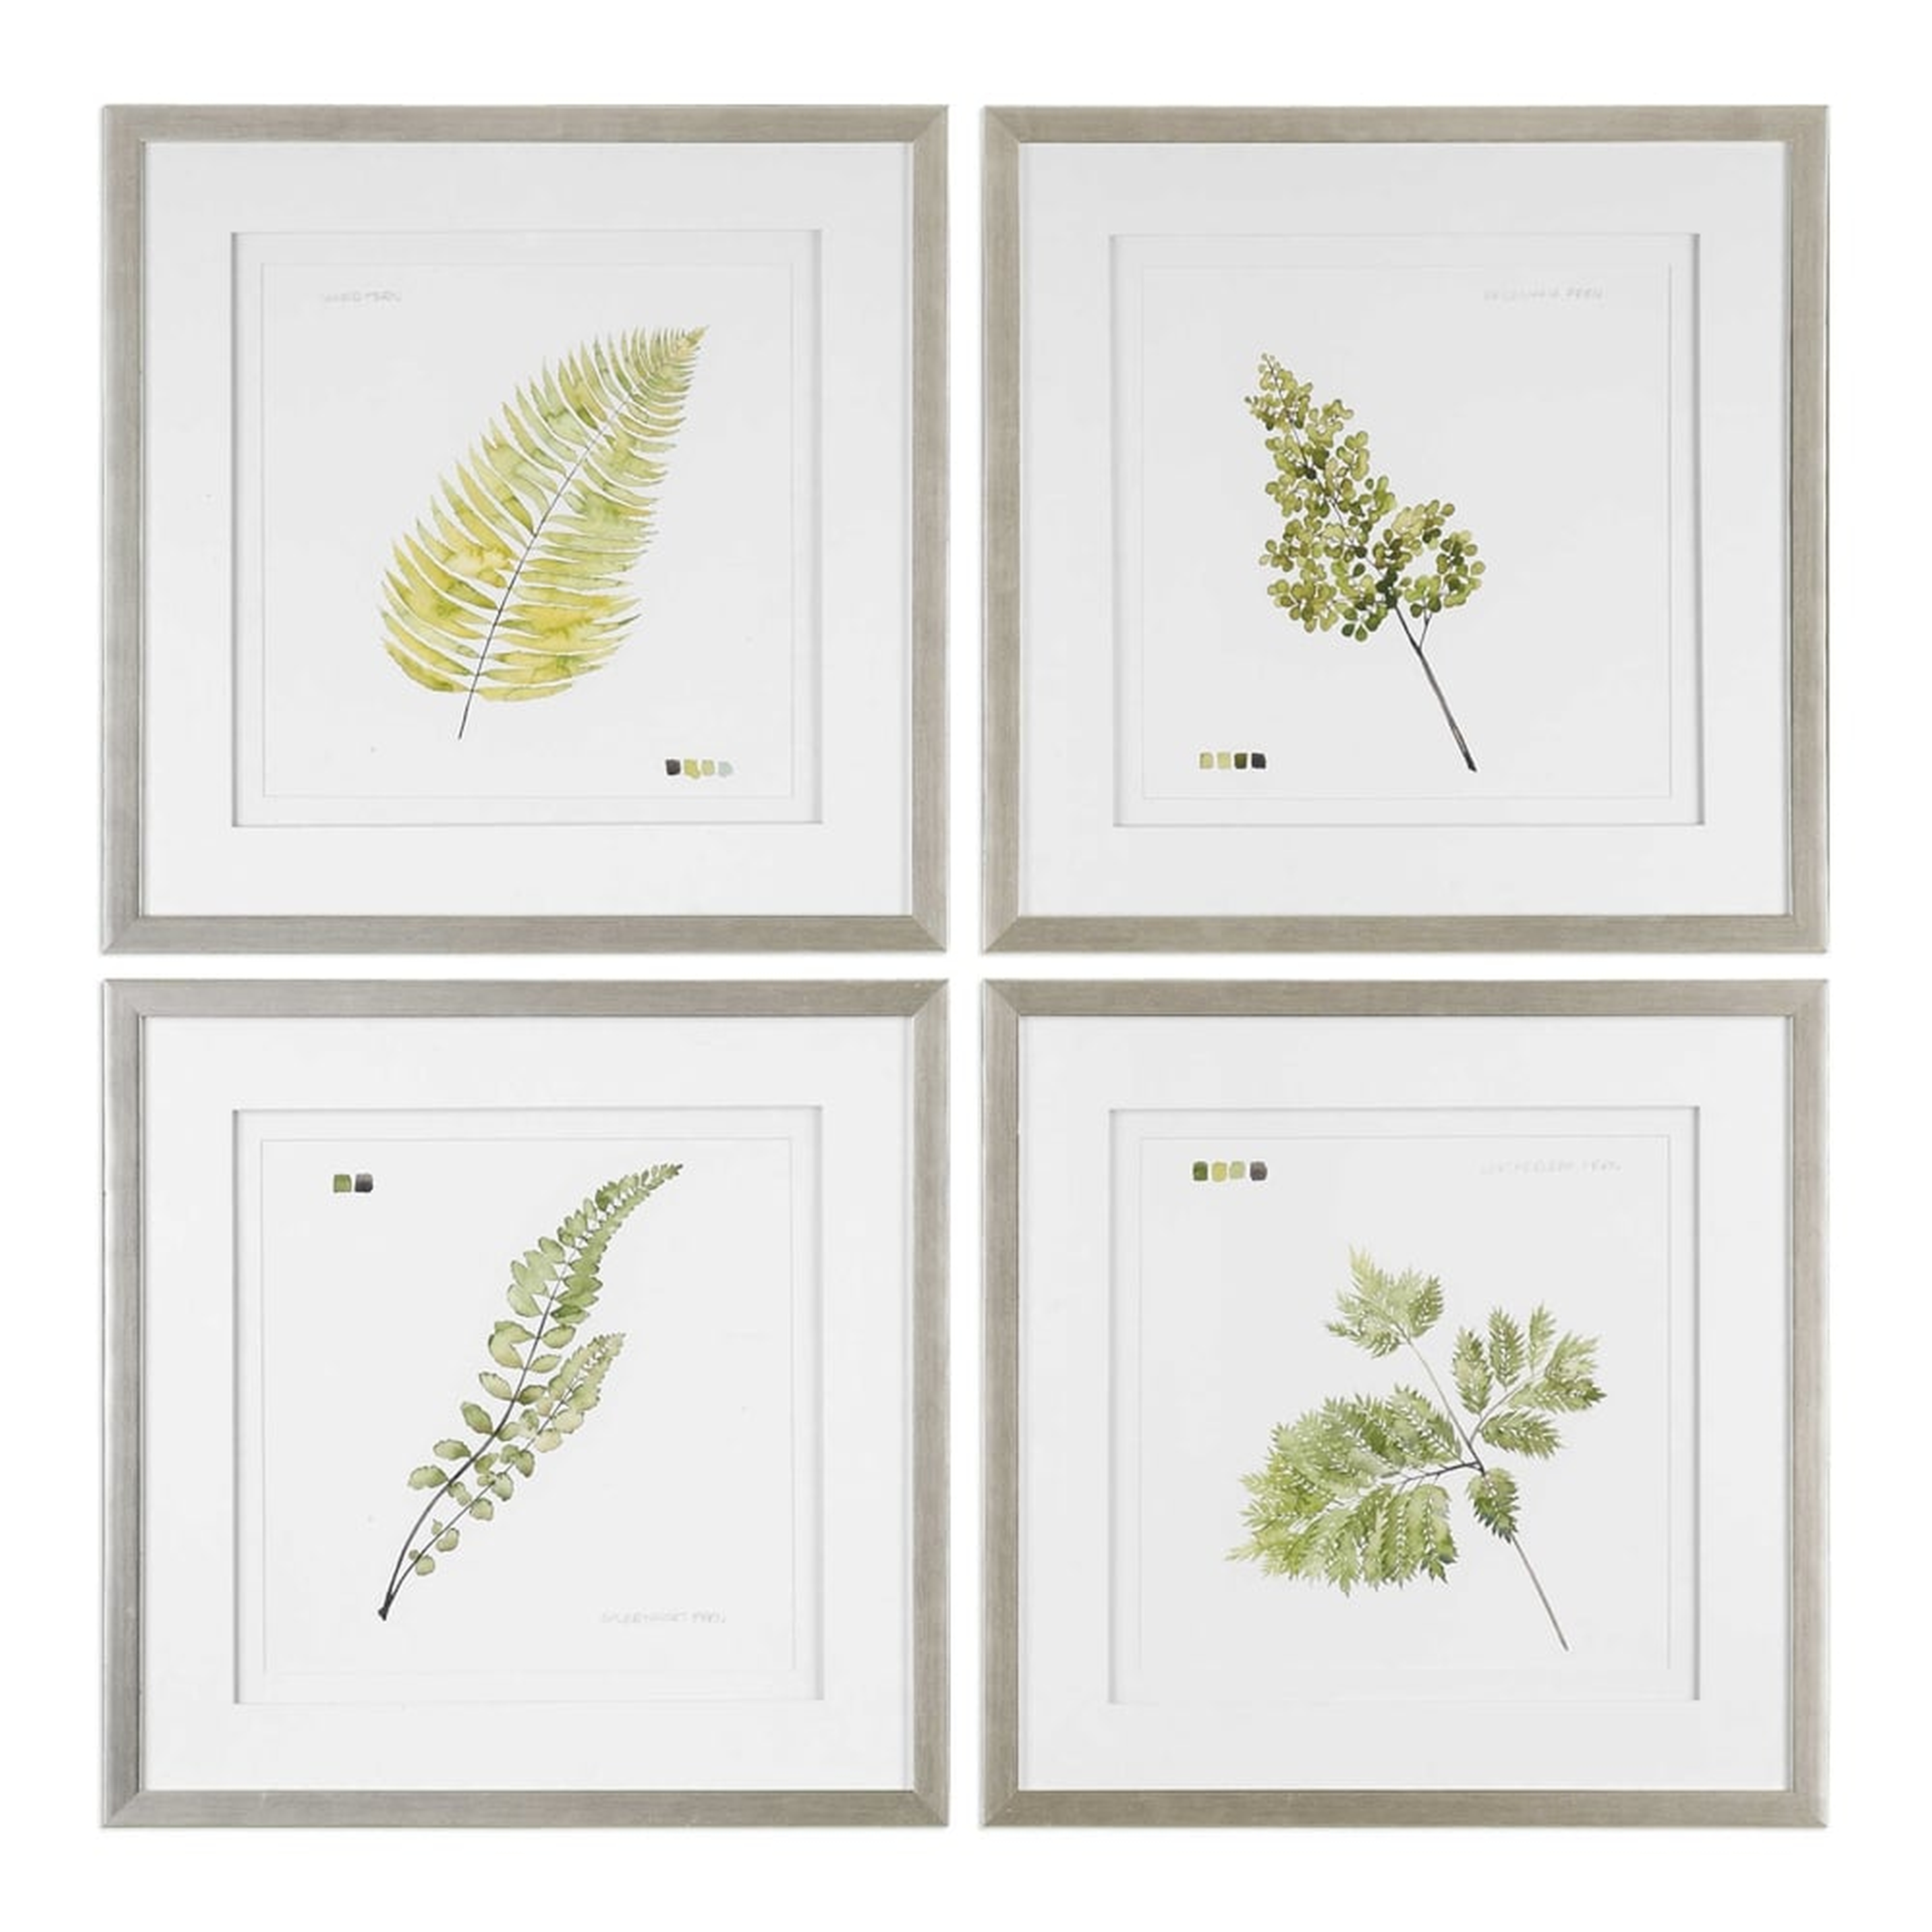 WATERCOLOR LEAF STUDY FRAMED PRINTS, S/4 - Hudsonhill Foundry